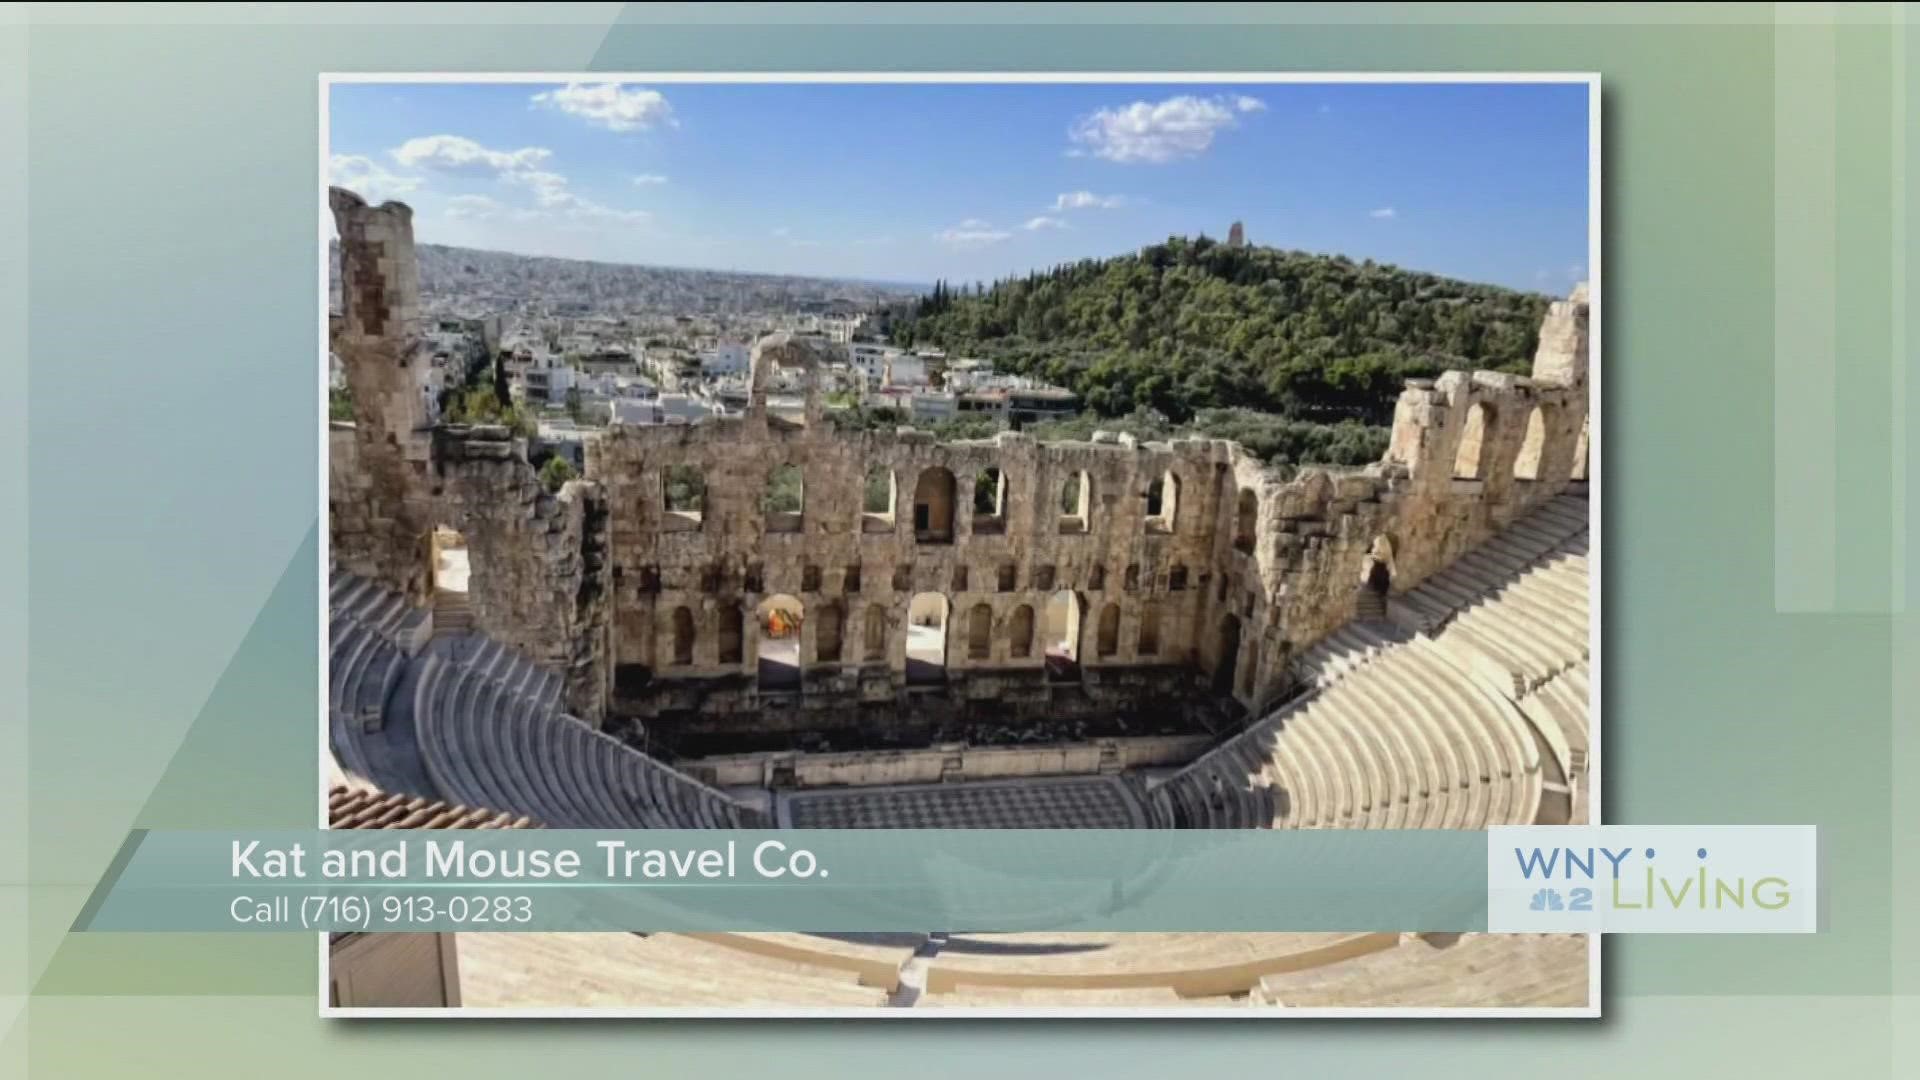 January 21st - Kat & Mouse Travel - THIS VIDEO IS SPONSORED BY KAT & MOUSE TRAVEL